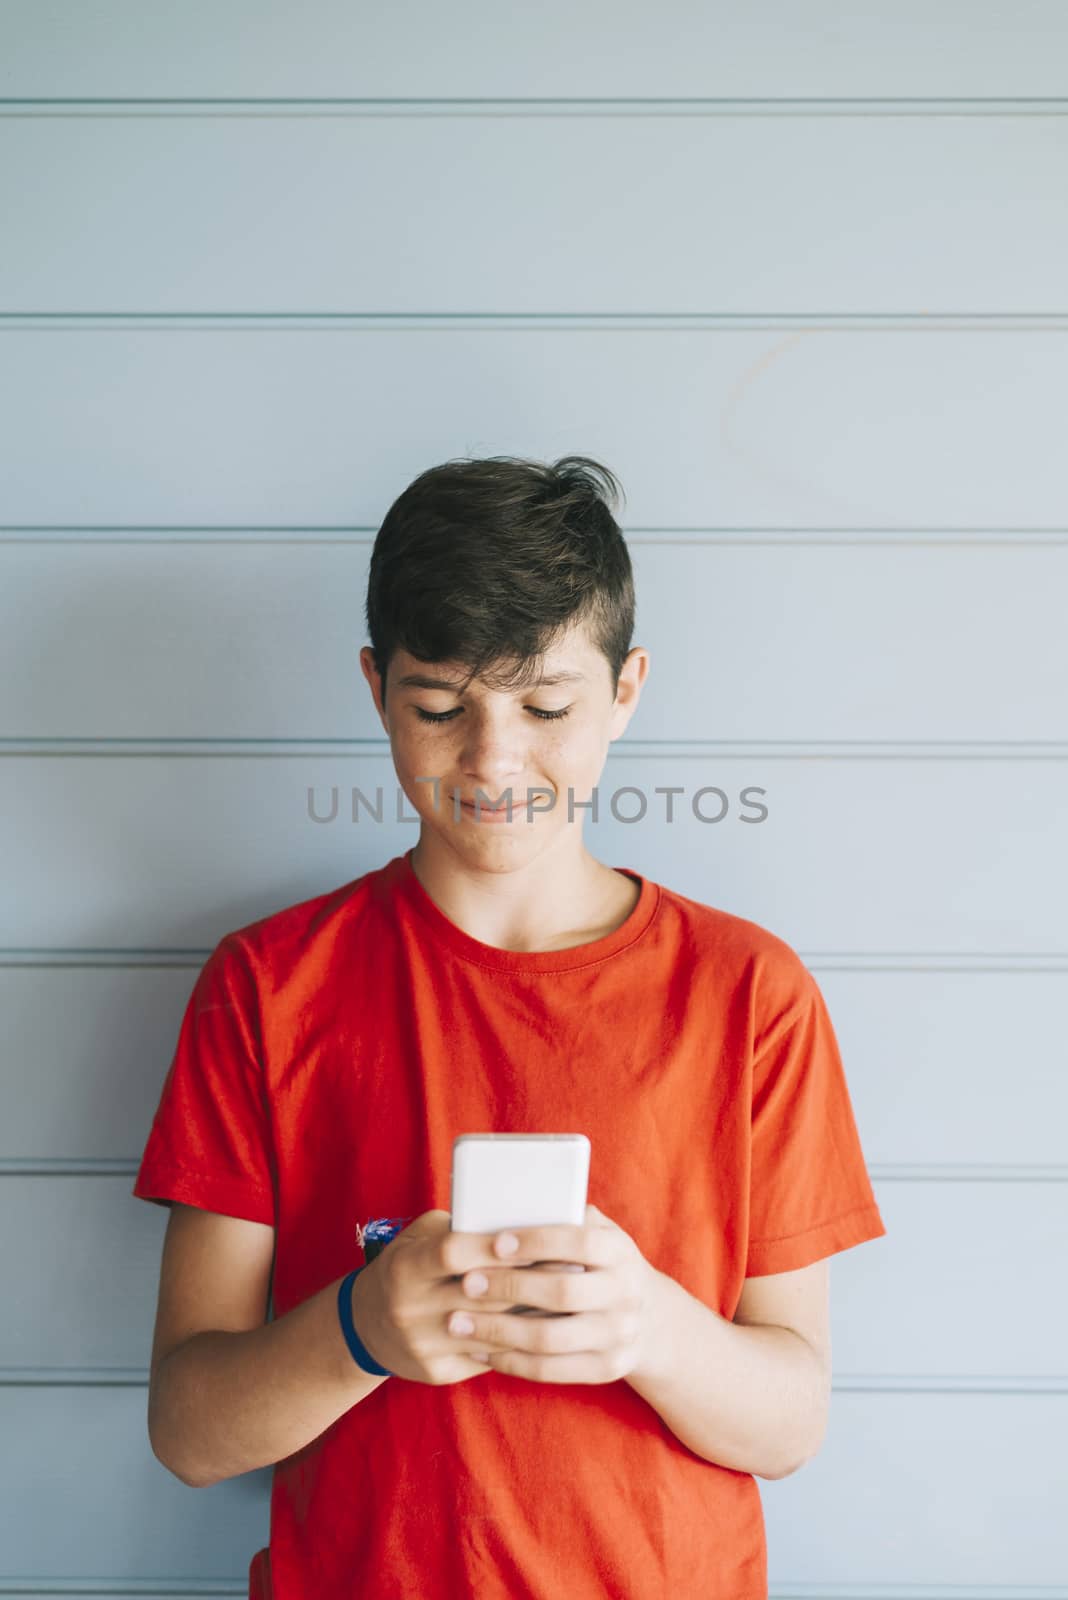 Profile of a happy guy texting on a smart phone